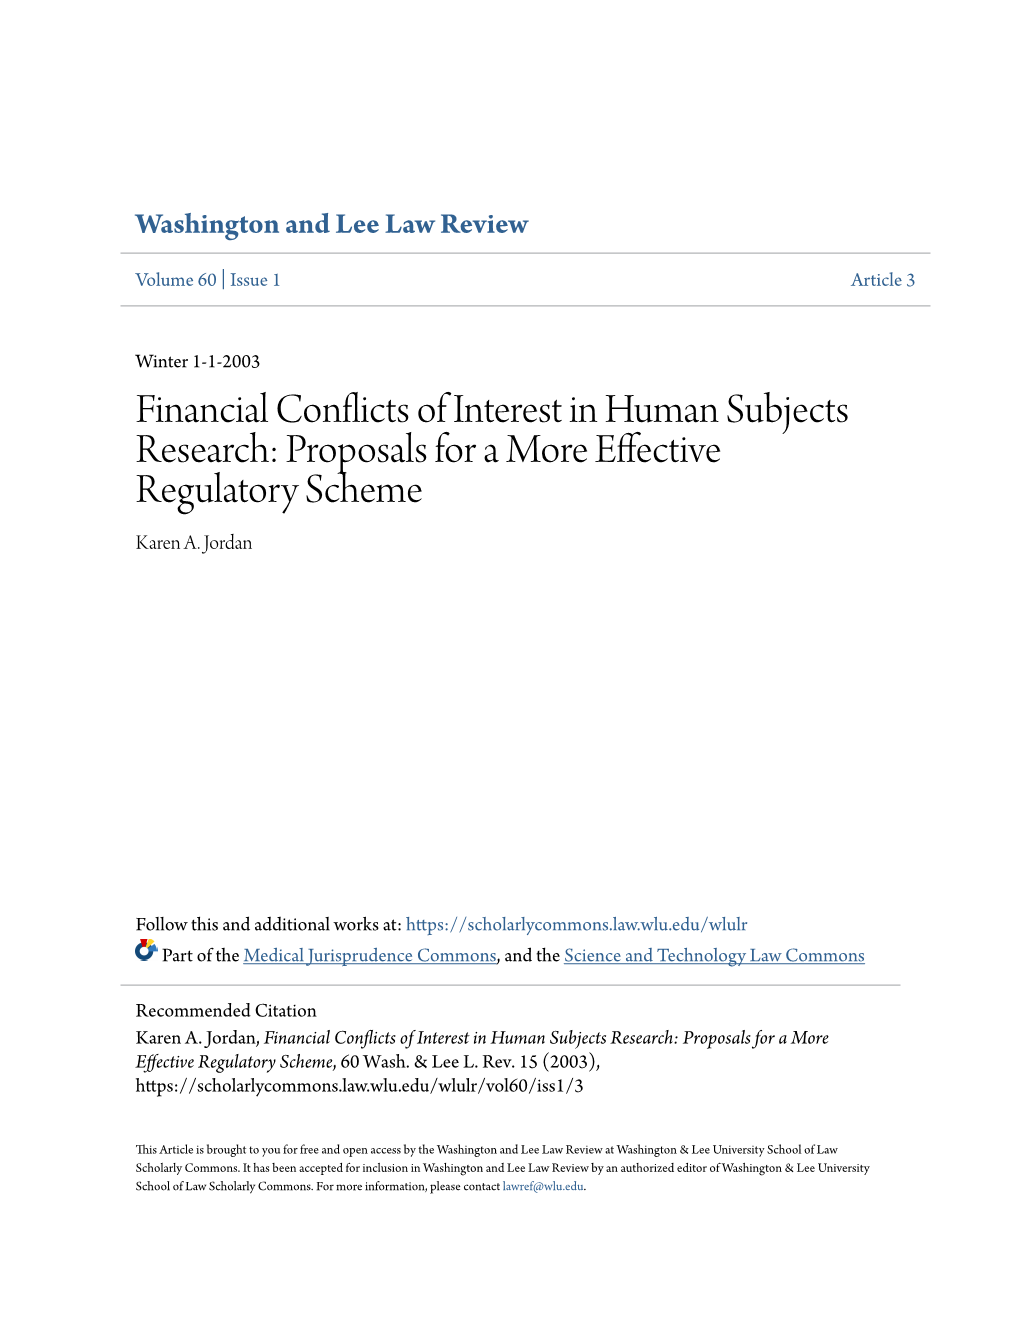 Financial Conflicts of Interest in Human Subjects Research: Proposals for a More Effective Regulatory Scheme Karen A